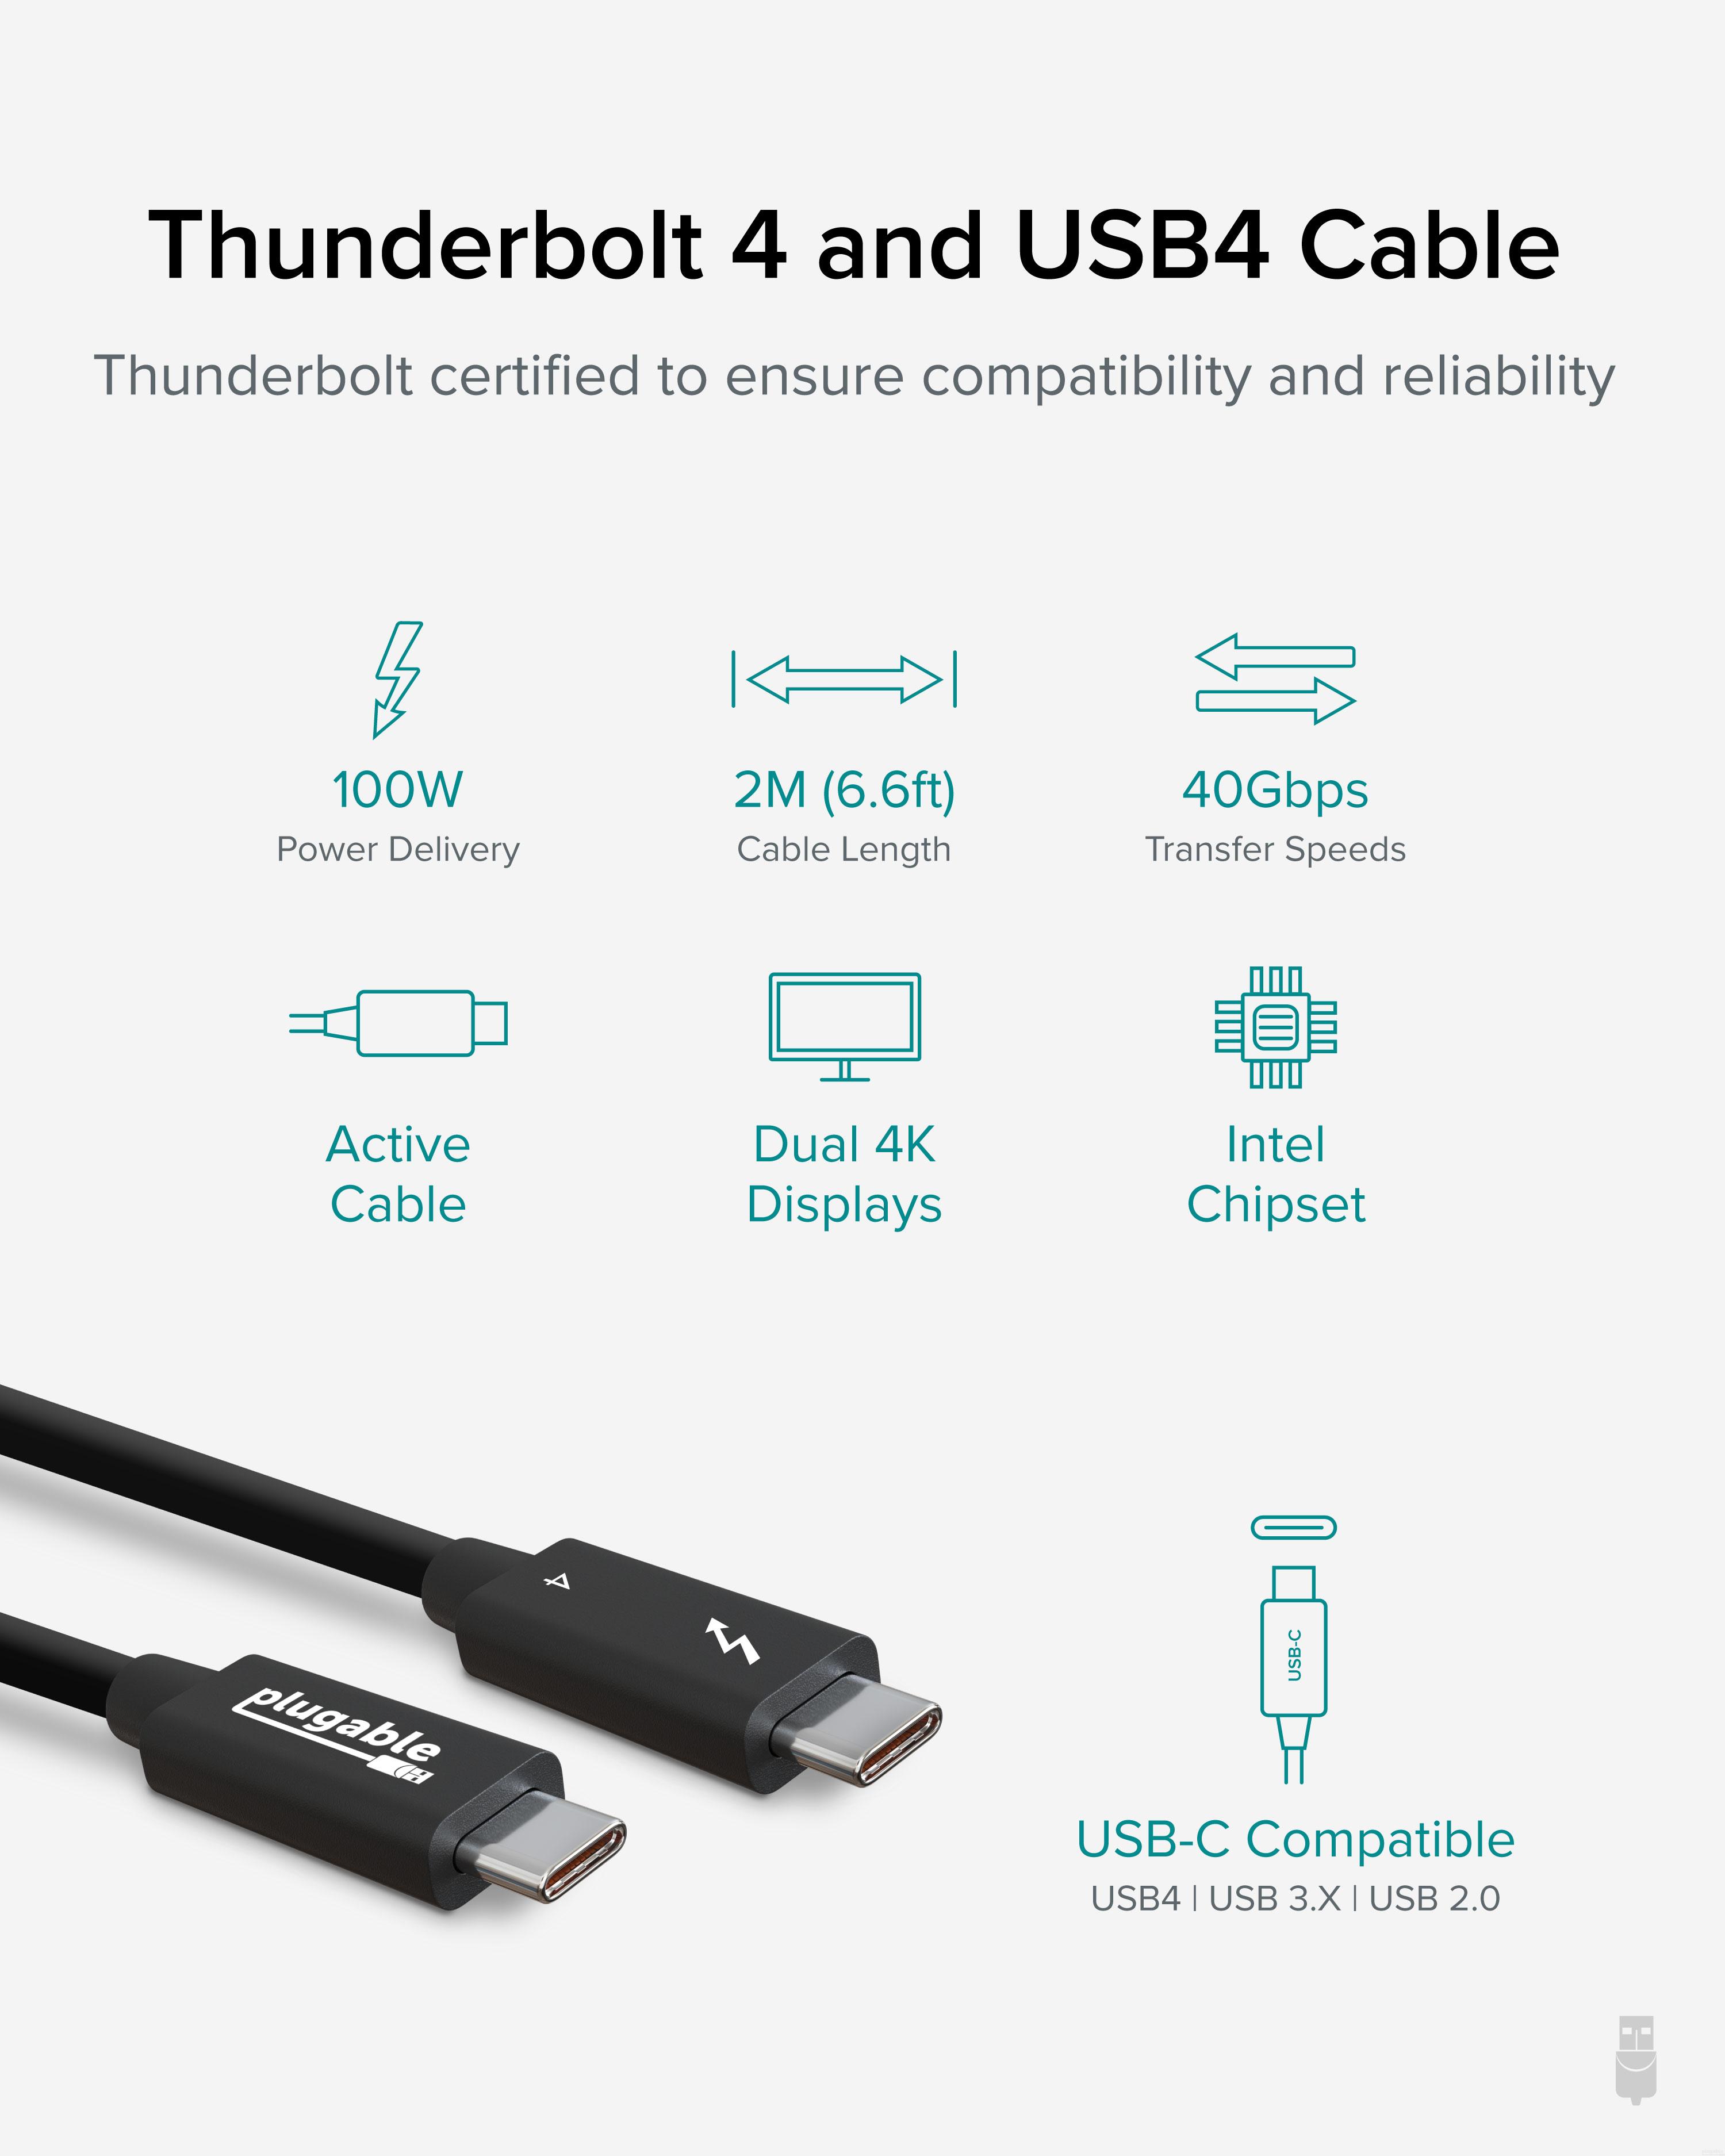 Plugable Thunderbolt 4 Cable [Thunderbolt Certified] 6.6ft USB4 Cable with 100W Charging, Single 8K or Dual 4K Displays, 40Gbps Data Transfer, Compatible with Thunderbolt 4, USB4, Thunderbolt 3, USB-C - image 2 of 7